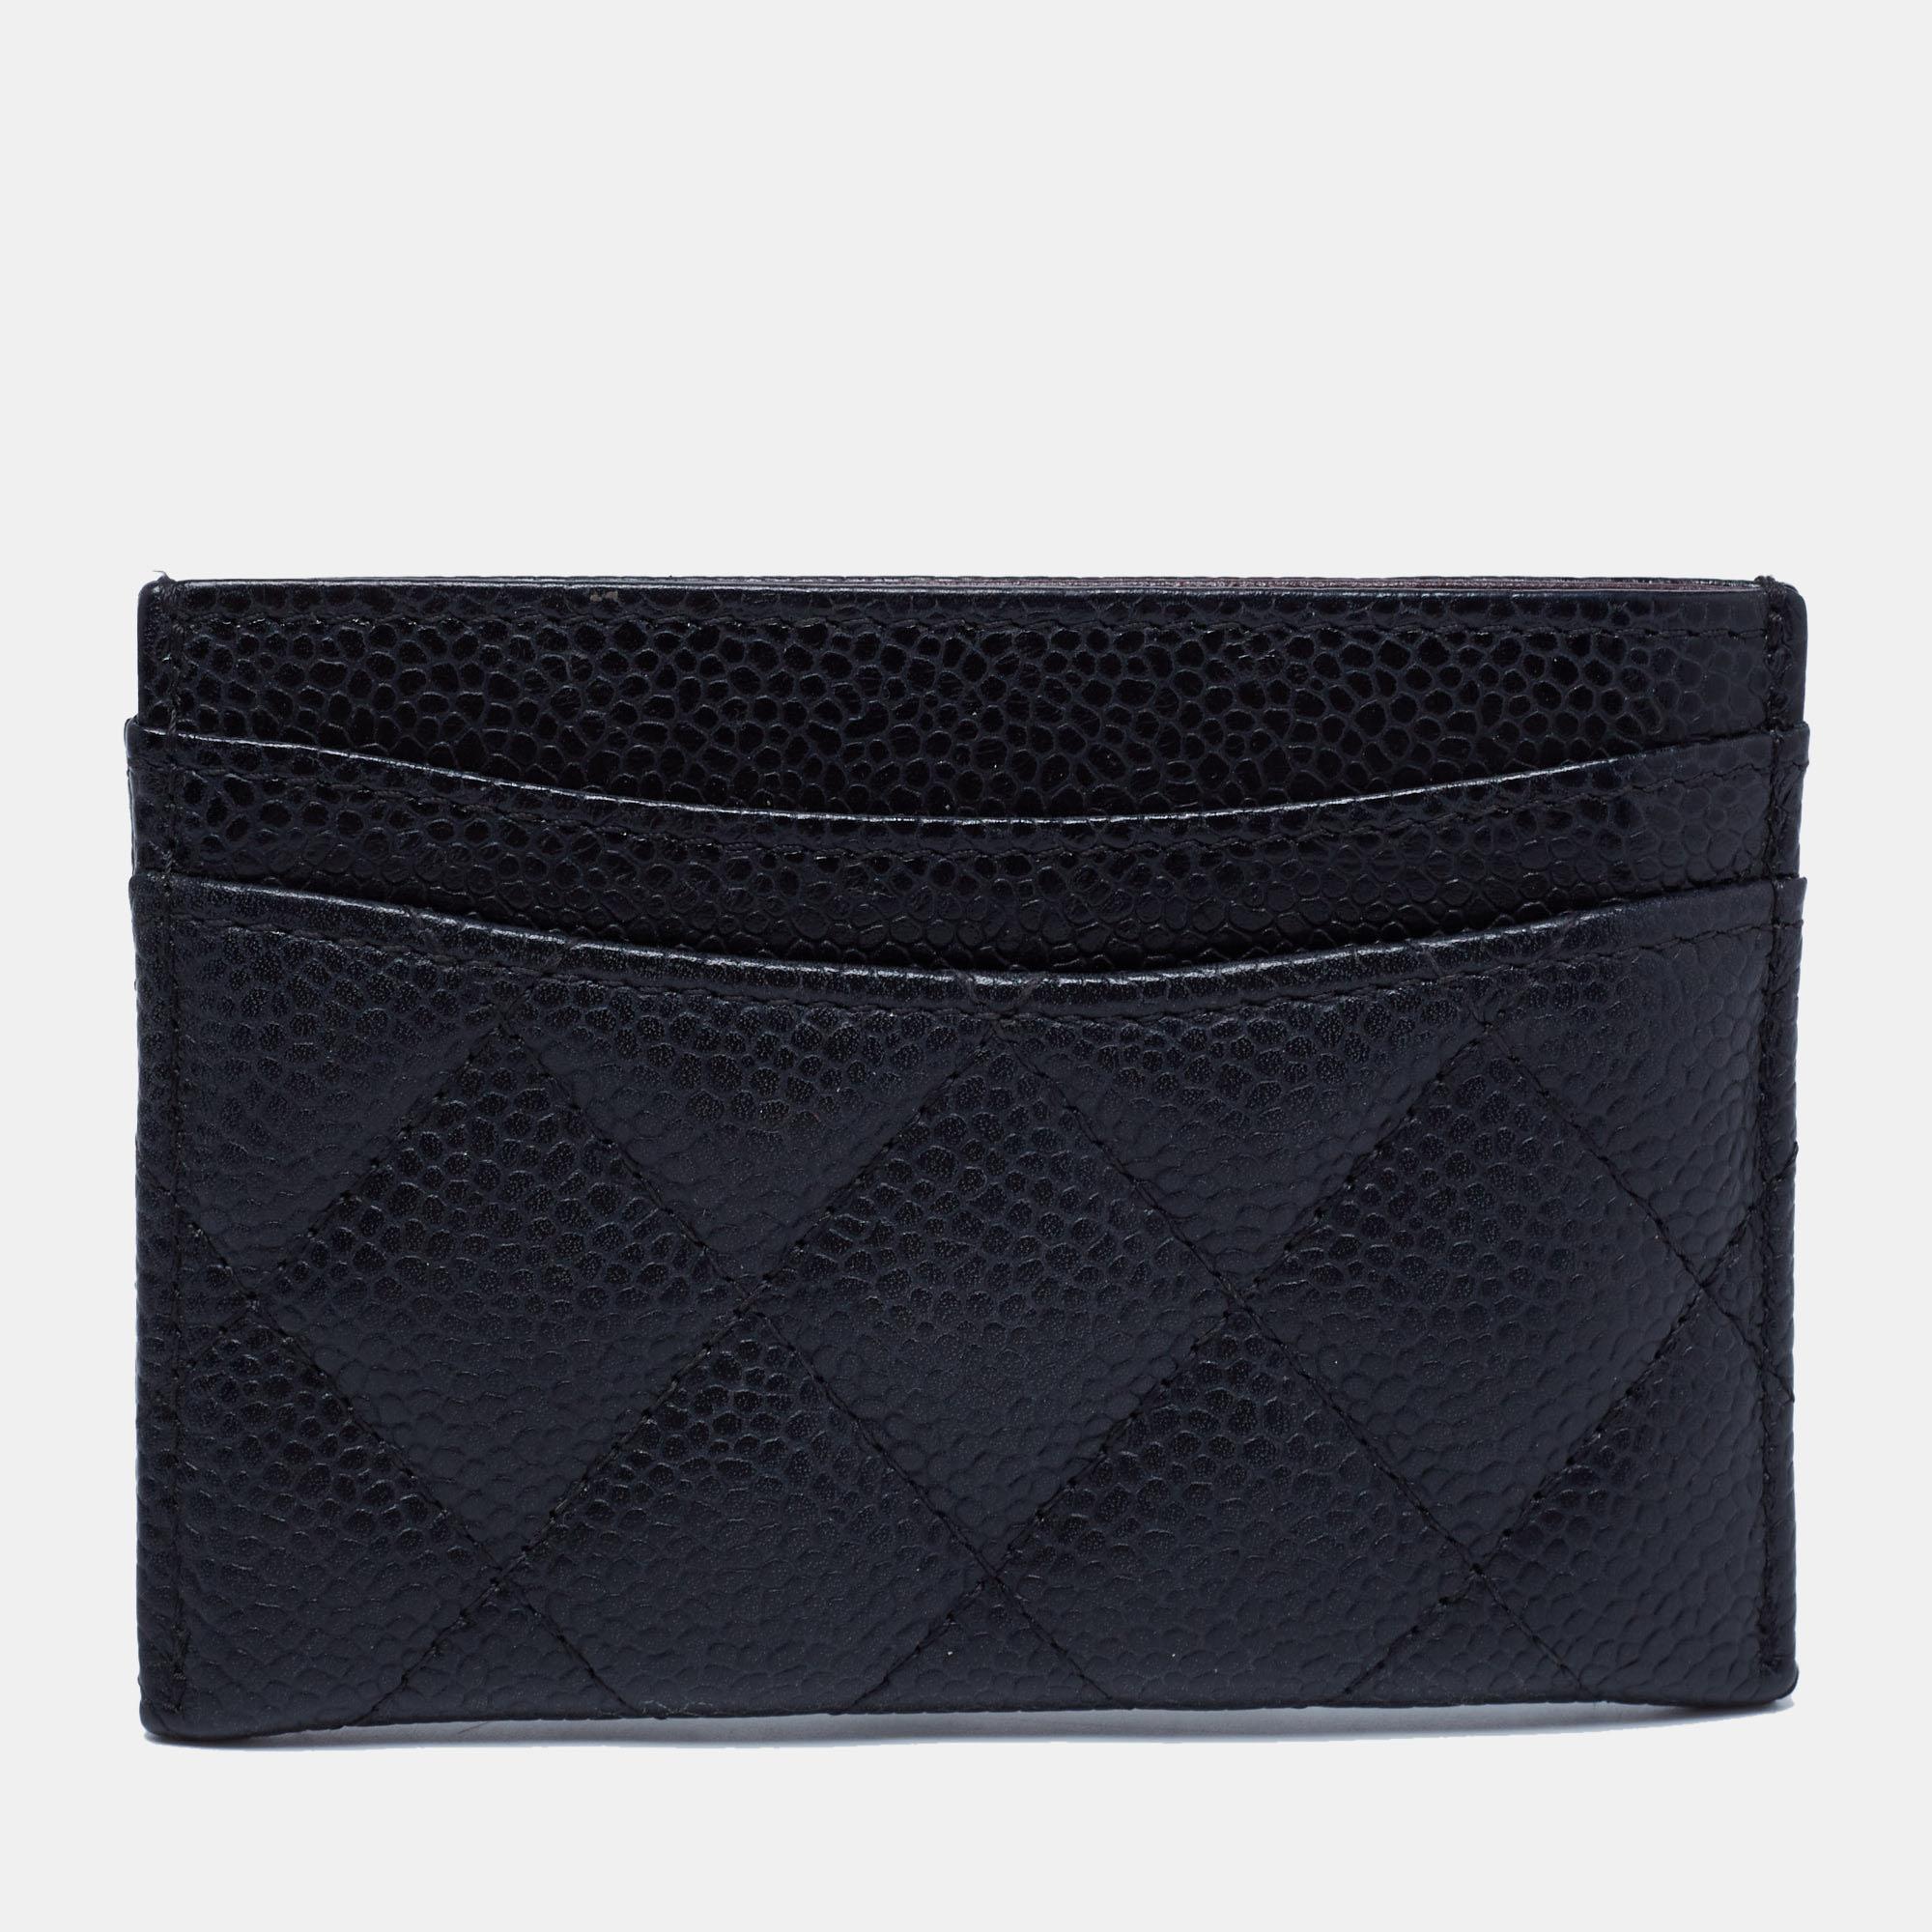 This card holder from Chanel is a perfect combination of sophistication and necessity. Crafted from Caviar leather, the sleek black piece has slots to stow your essential cards in place. It flaunts a quilted exterior and is complete with the iconic